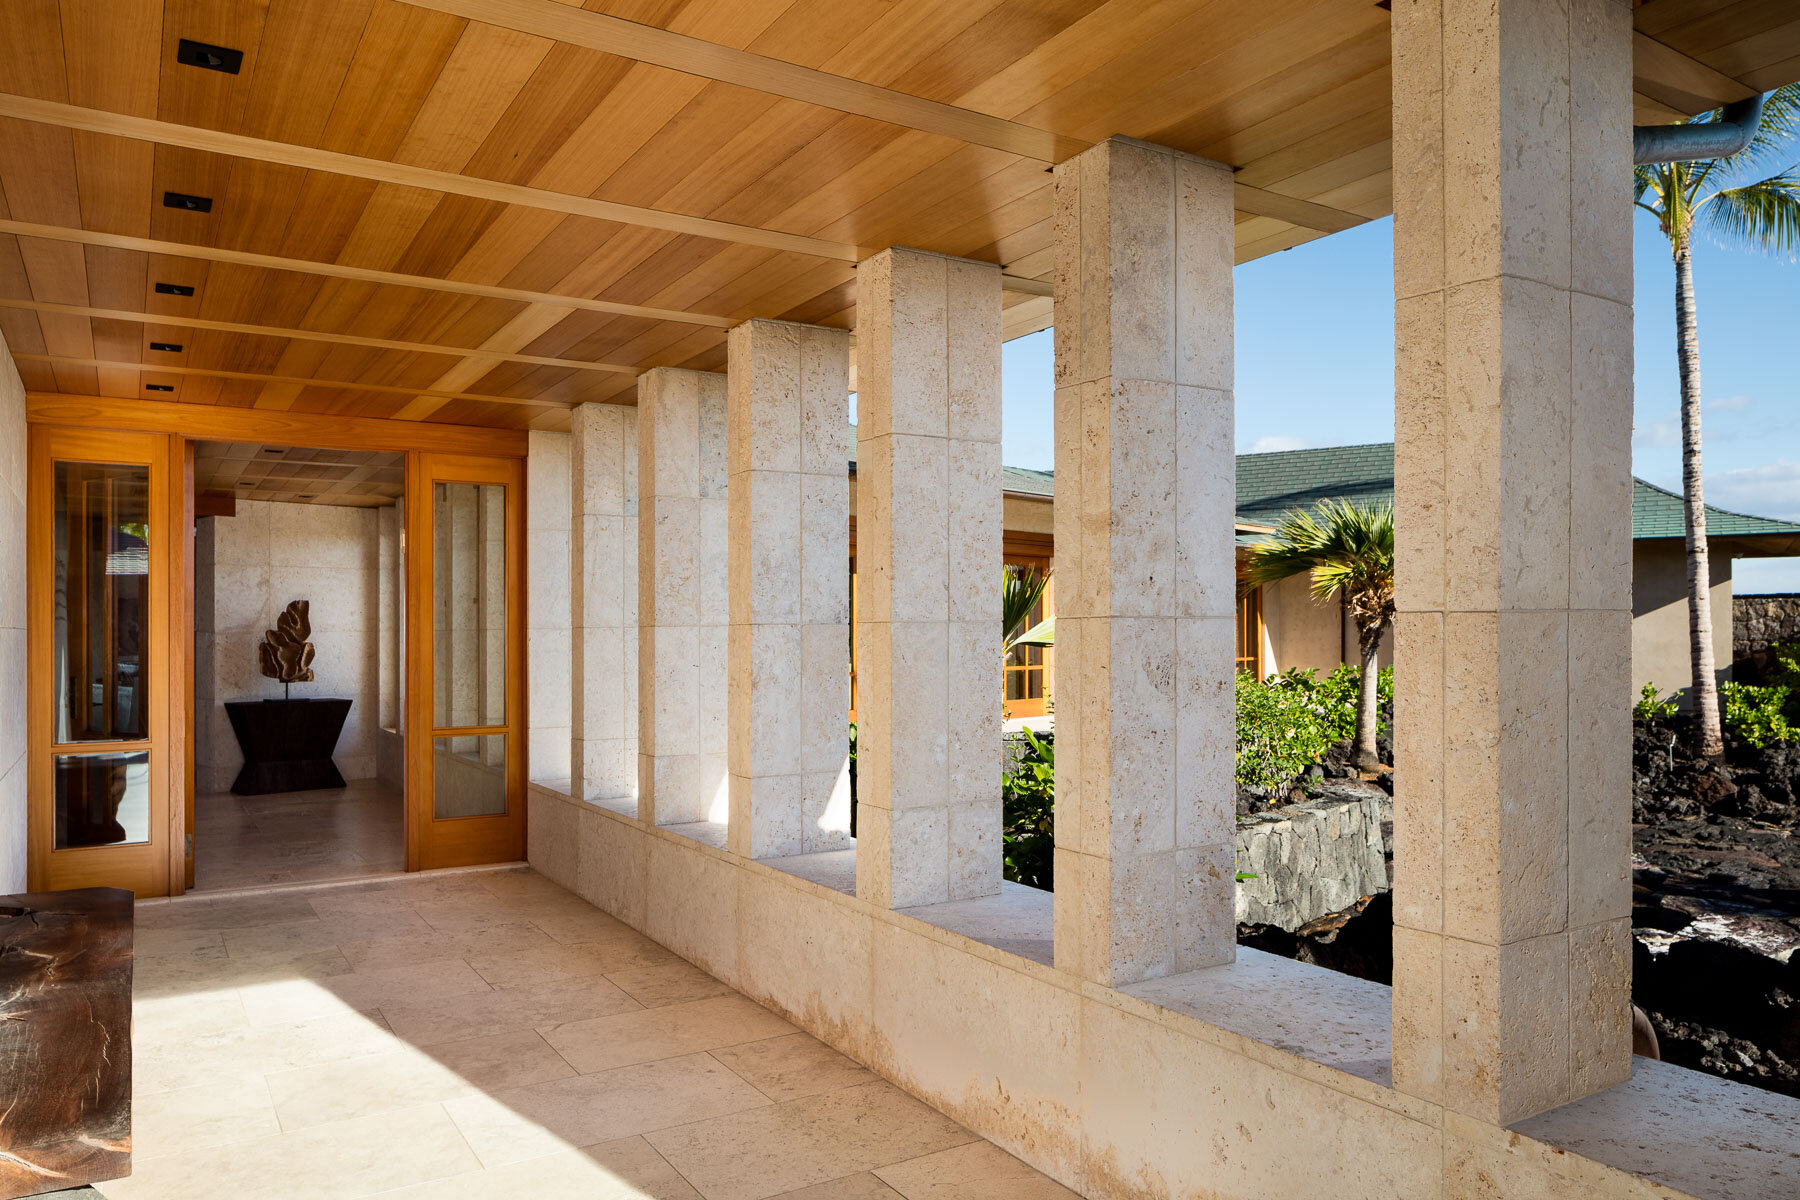  Colonnade of coral stone entry 